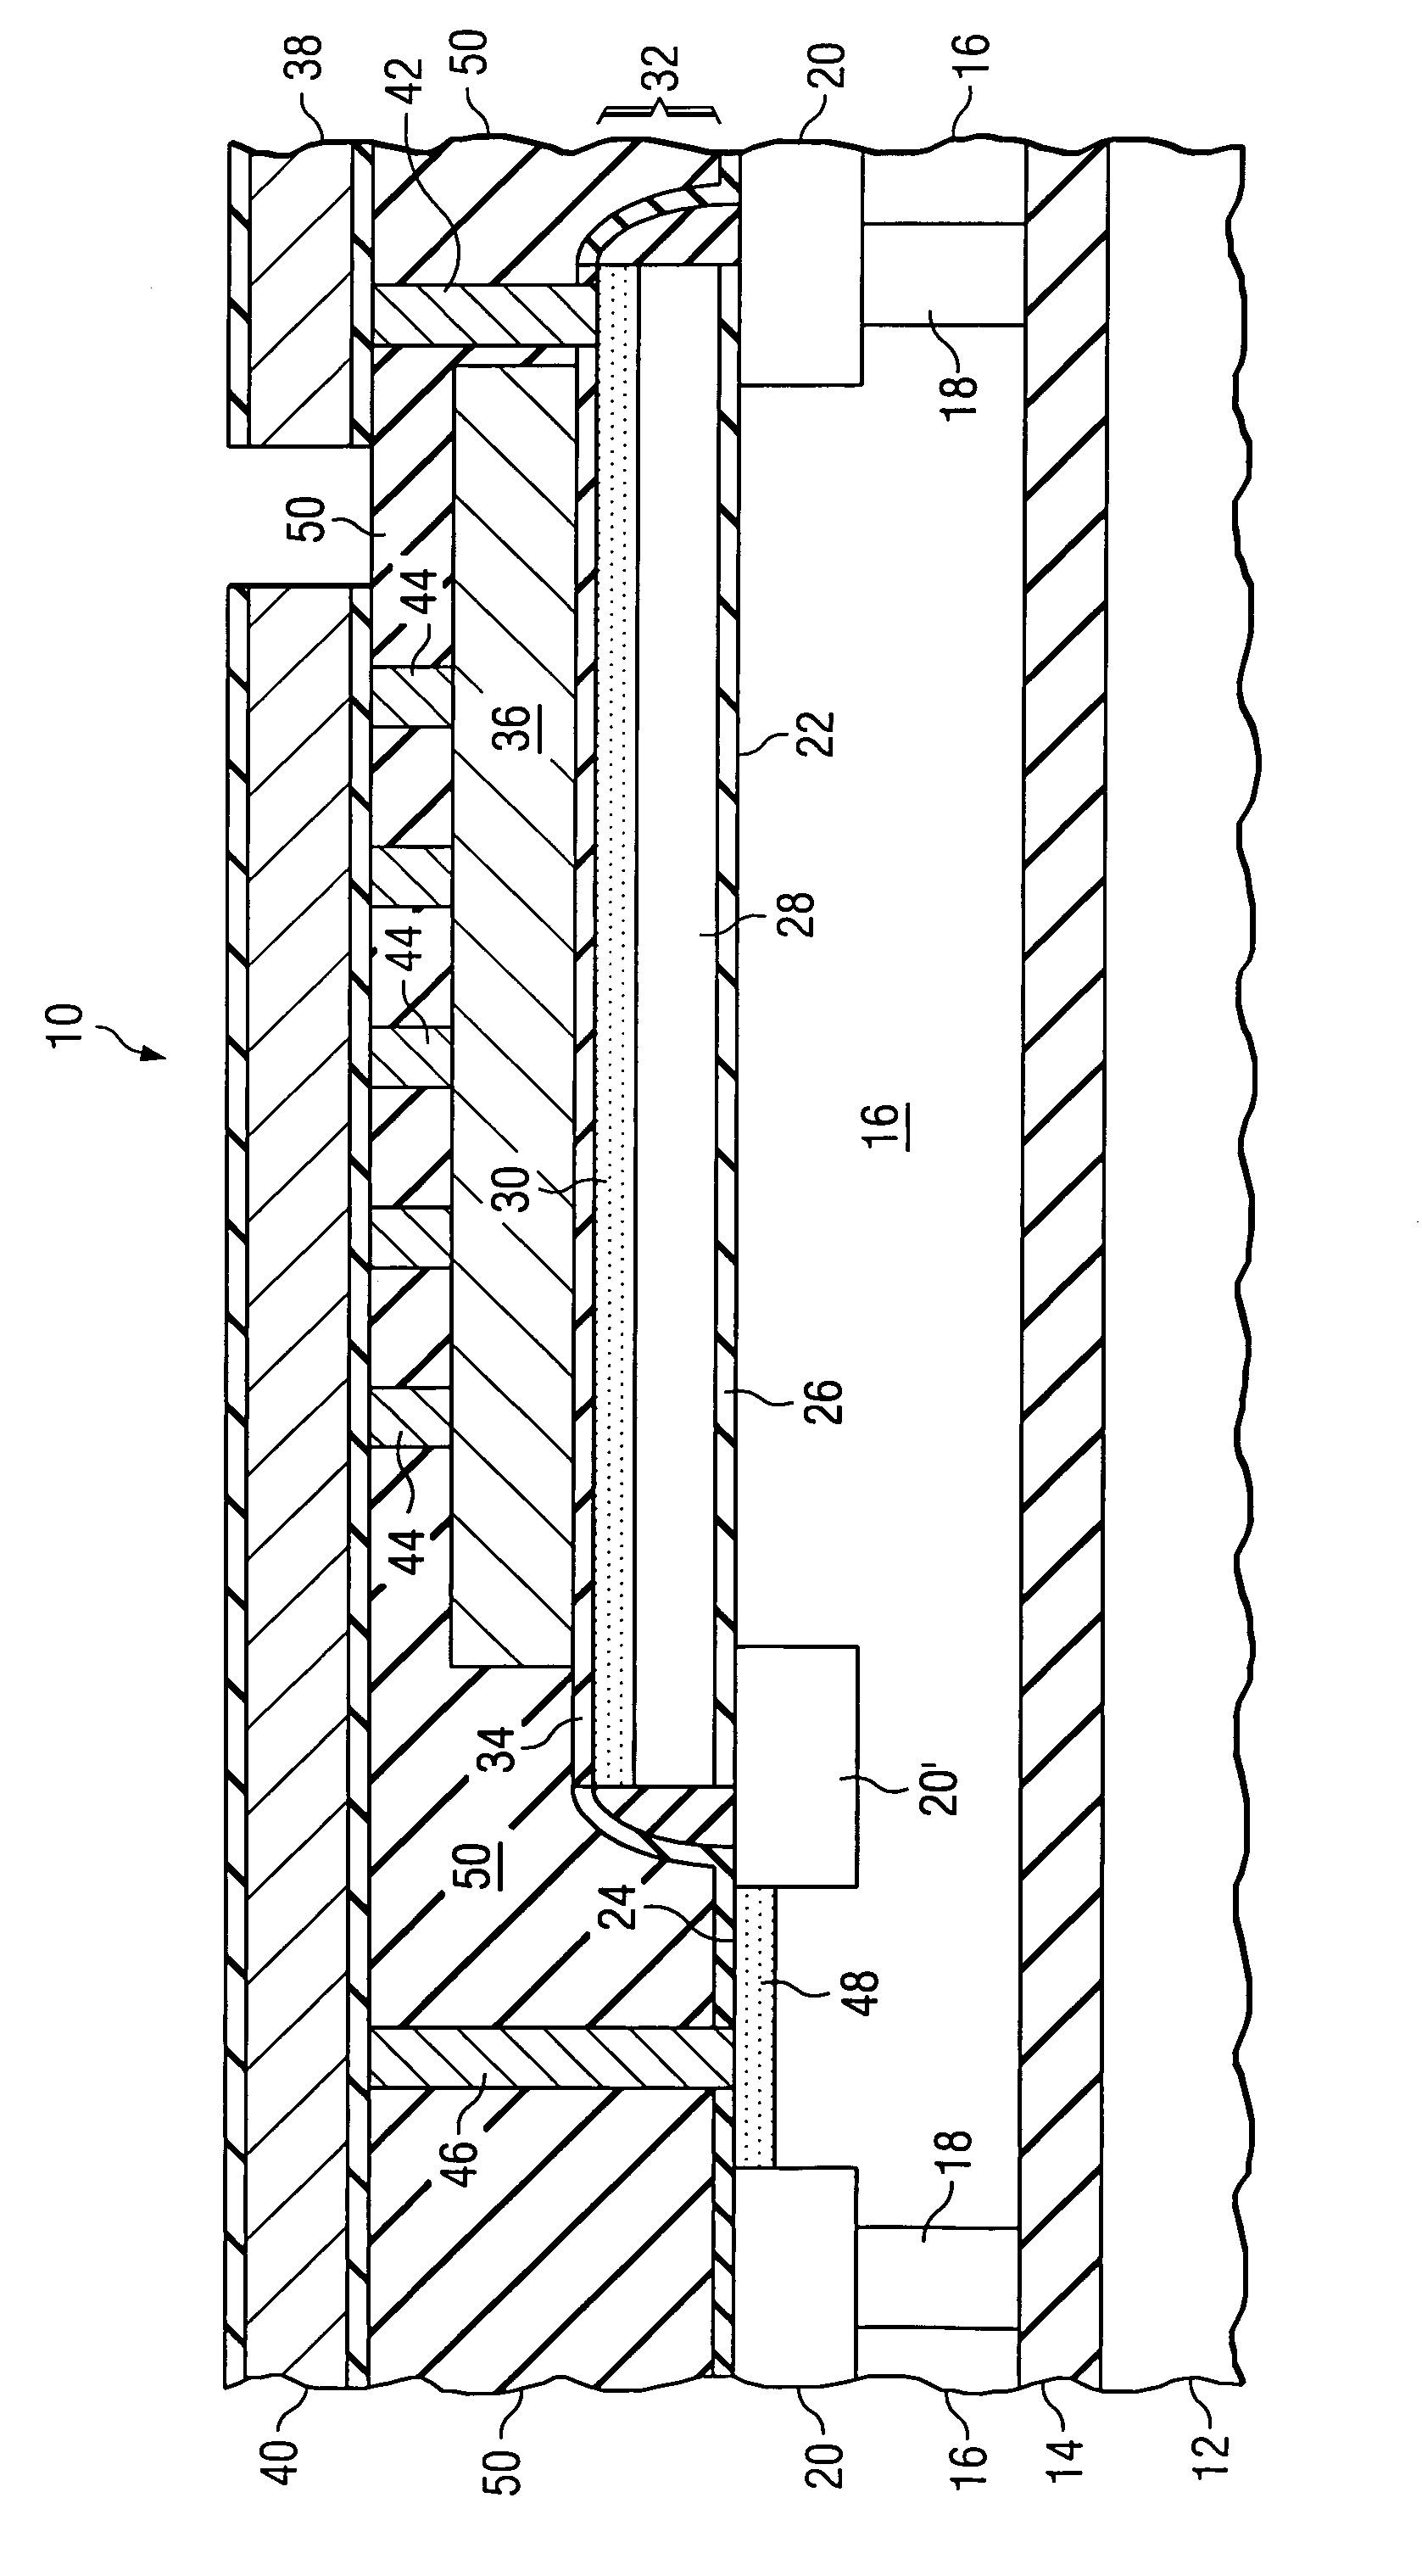 Stacked capacitor and method for fabricating same